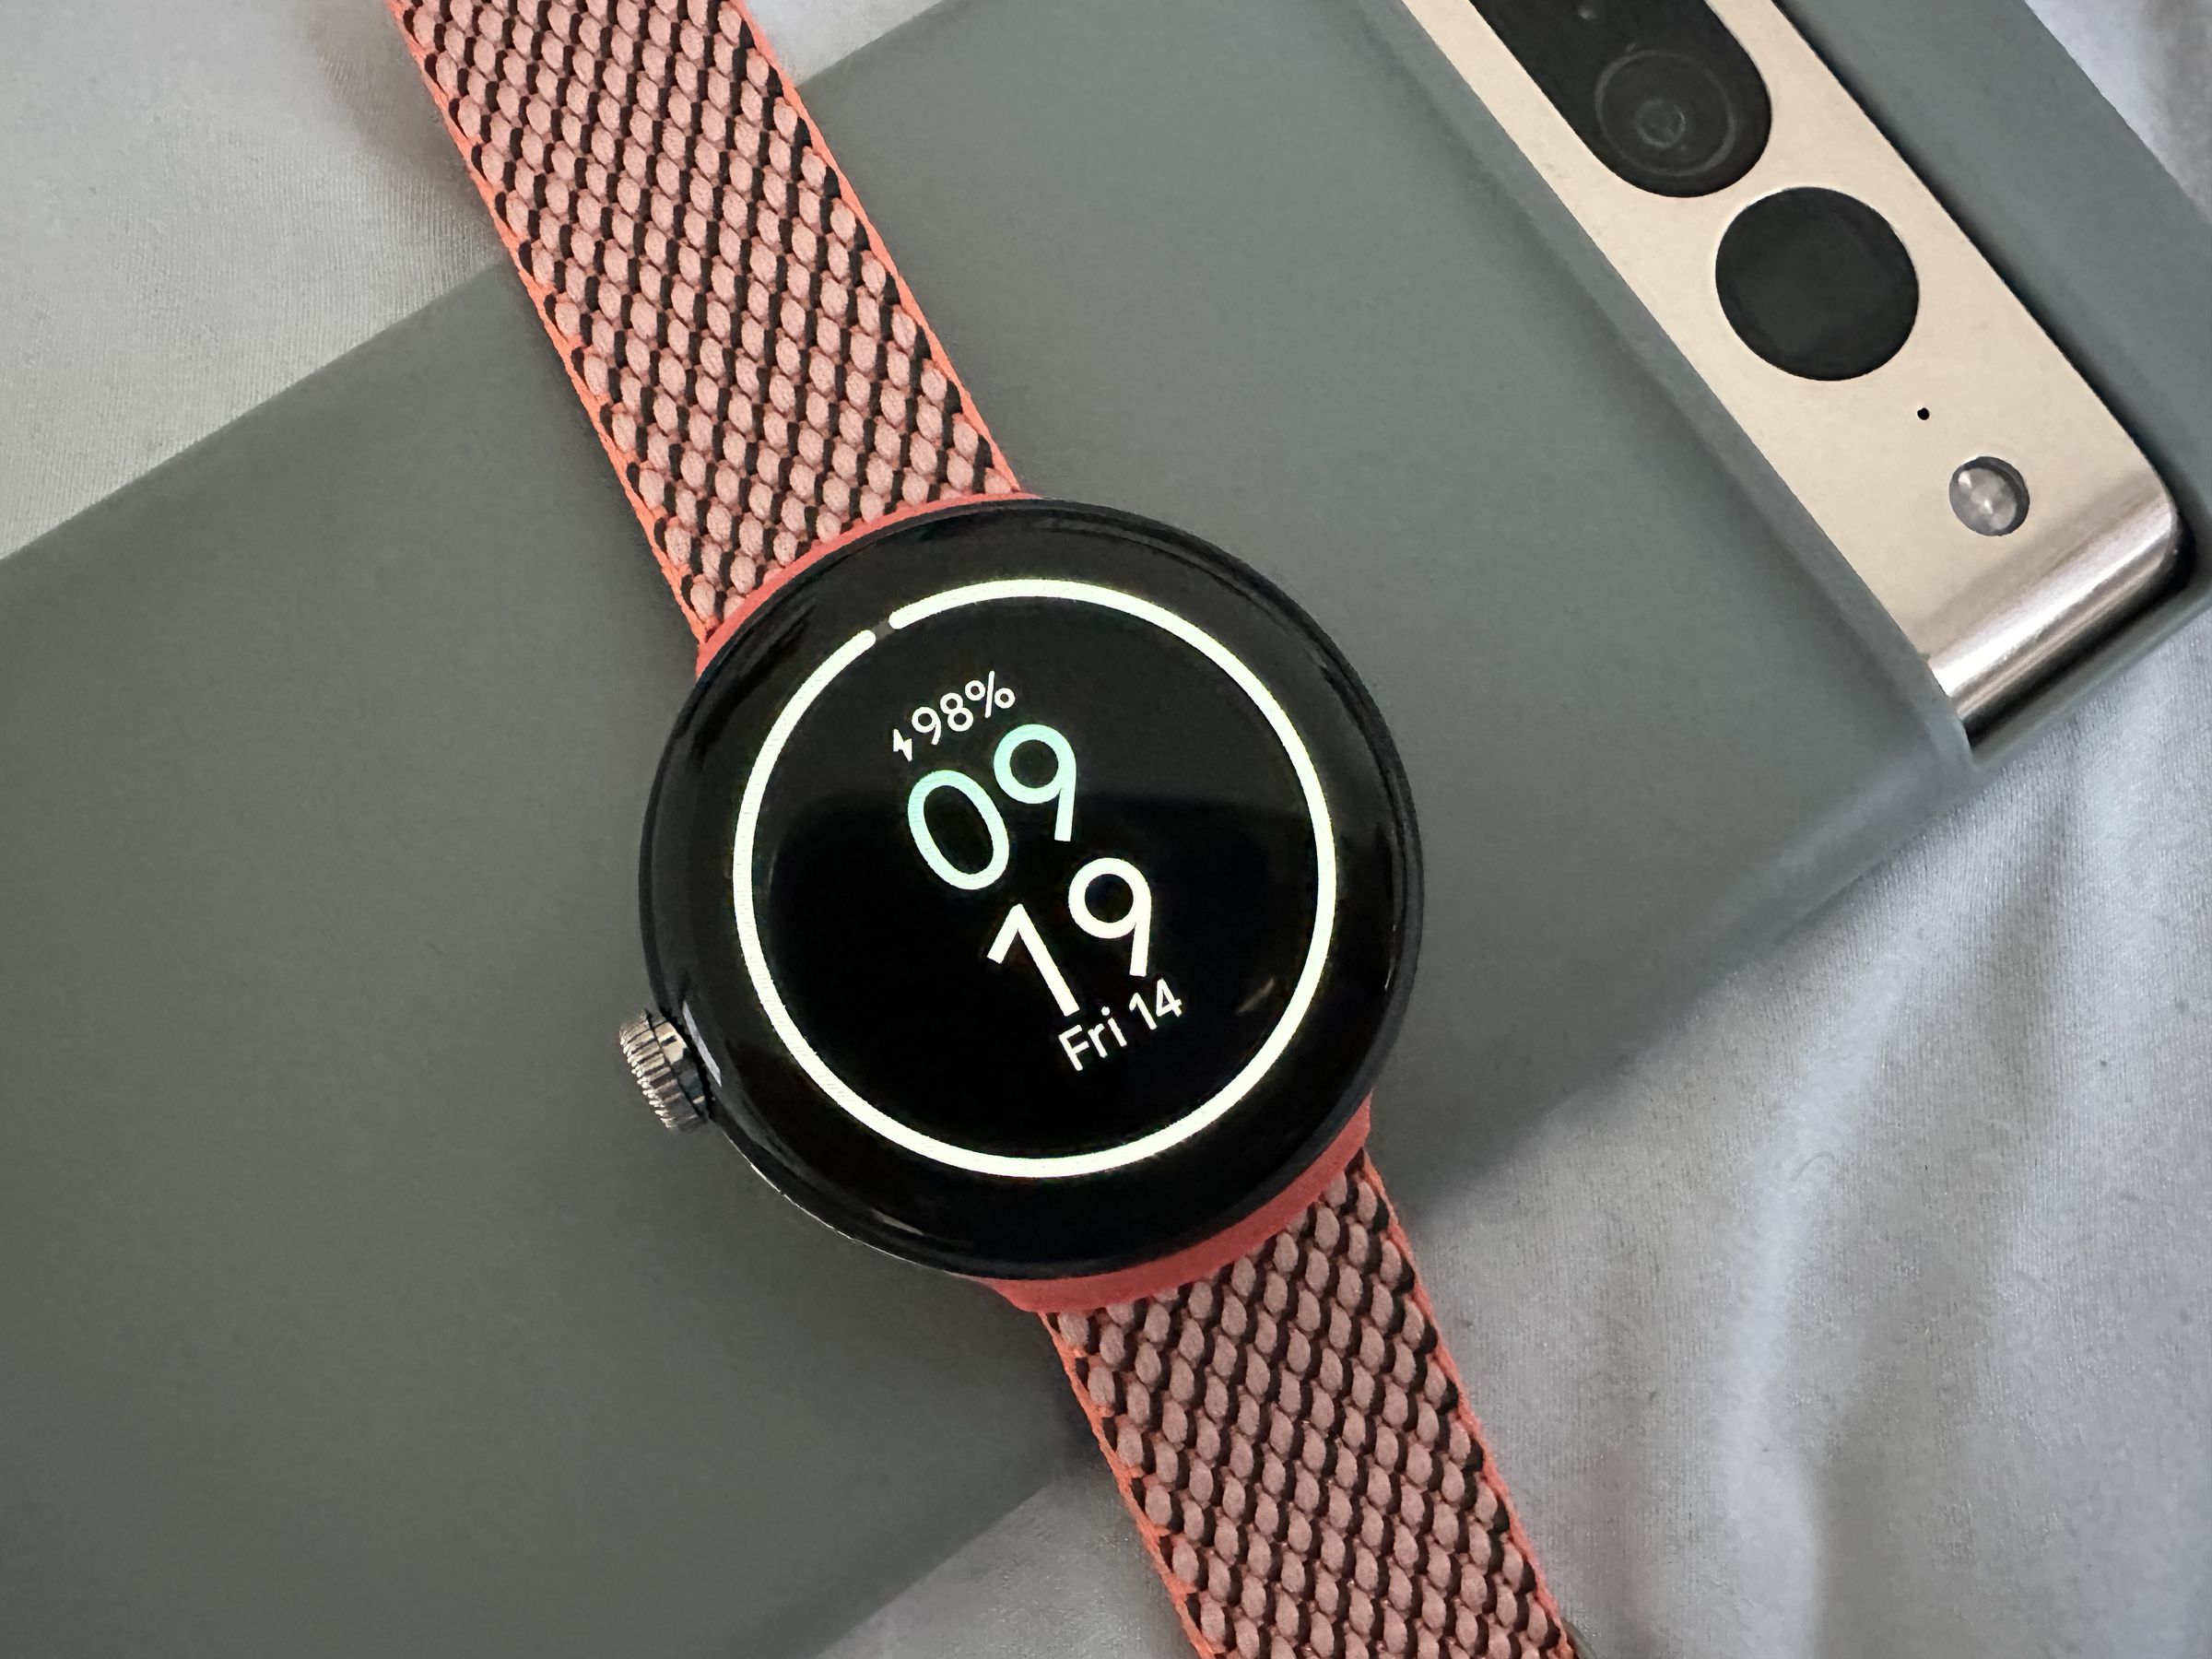 Pixel Watch reverse charging from the Pixel 7 Pro